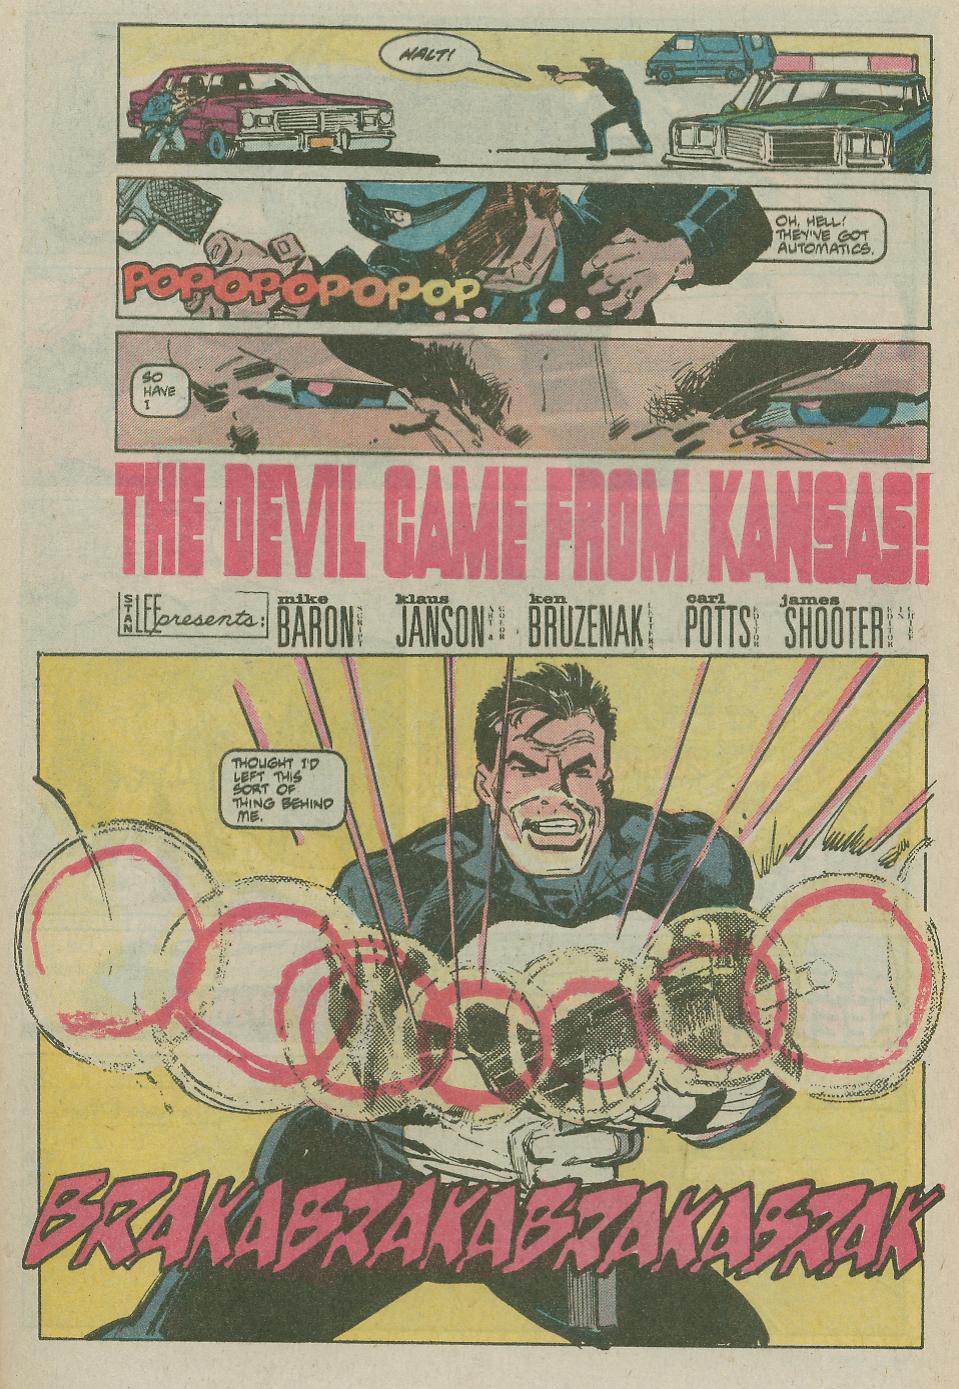 The Punisher (1987) Issue #3 - The Devil Came from Kansas! #10 - English 4